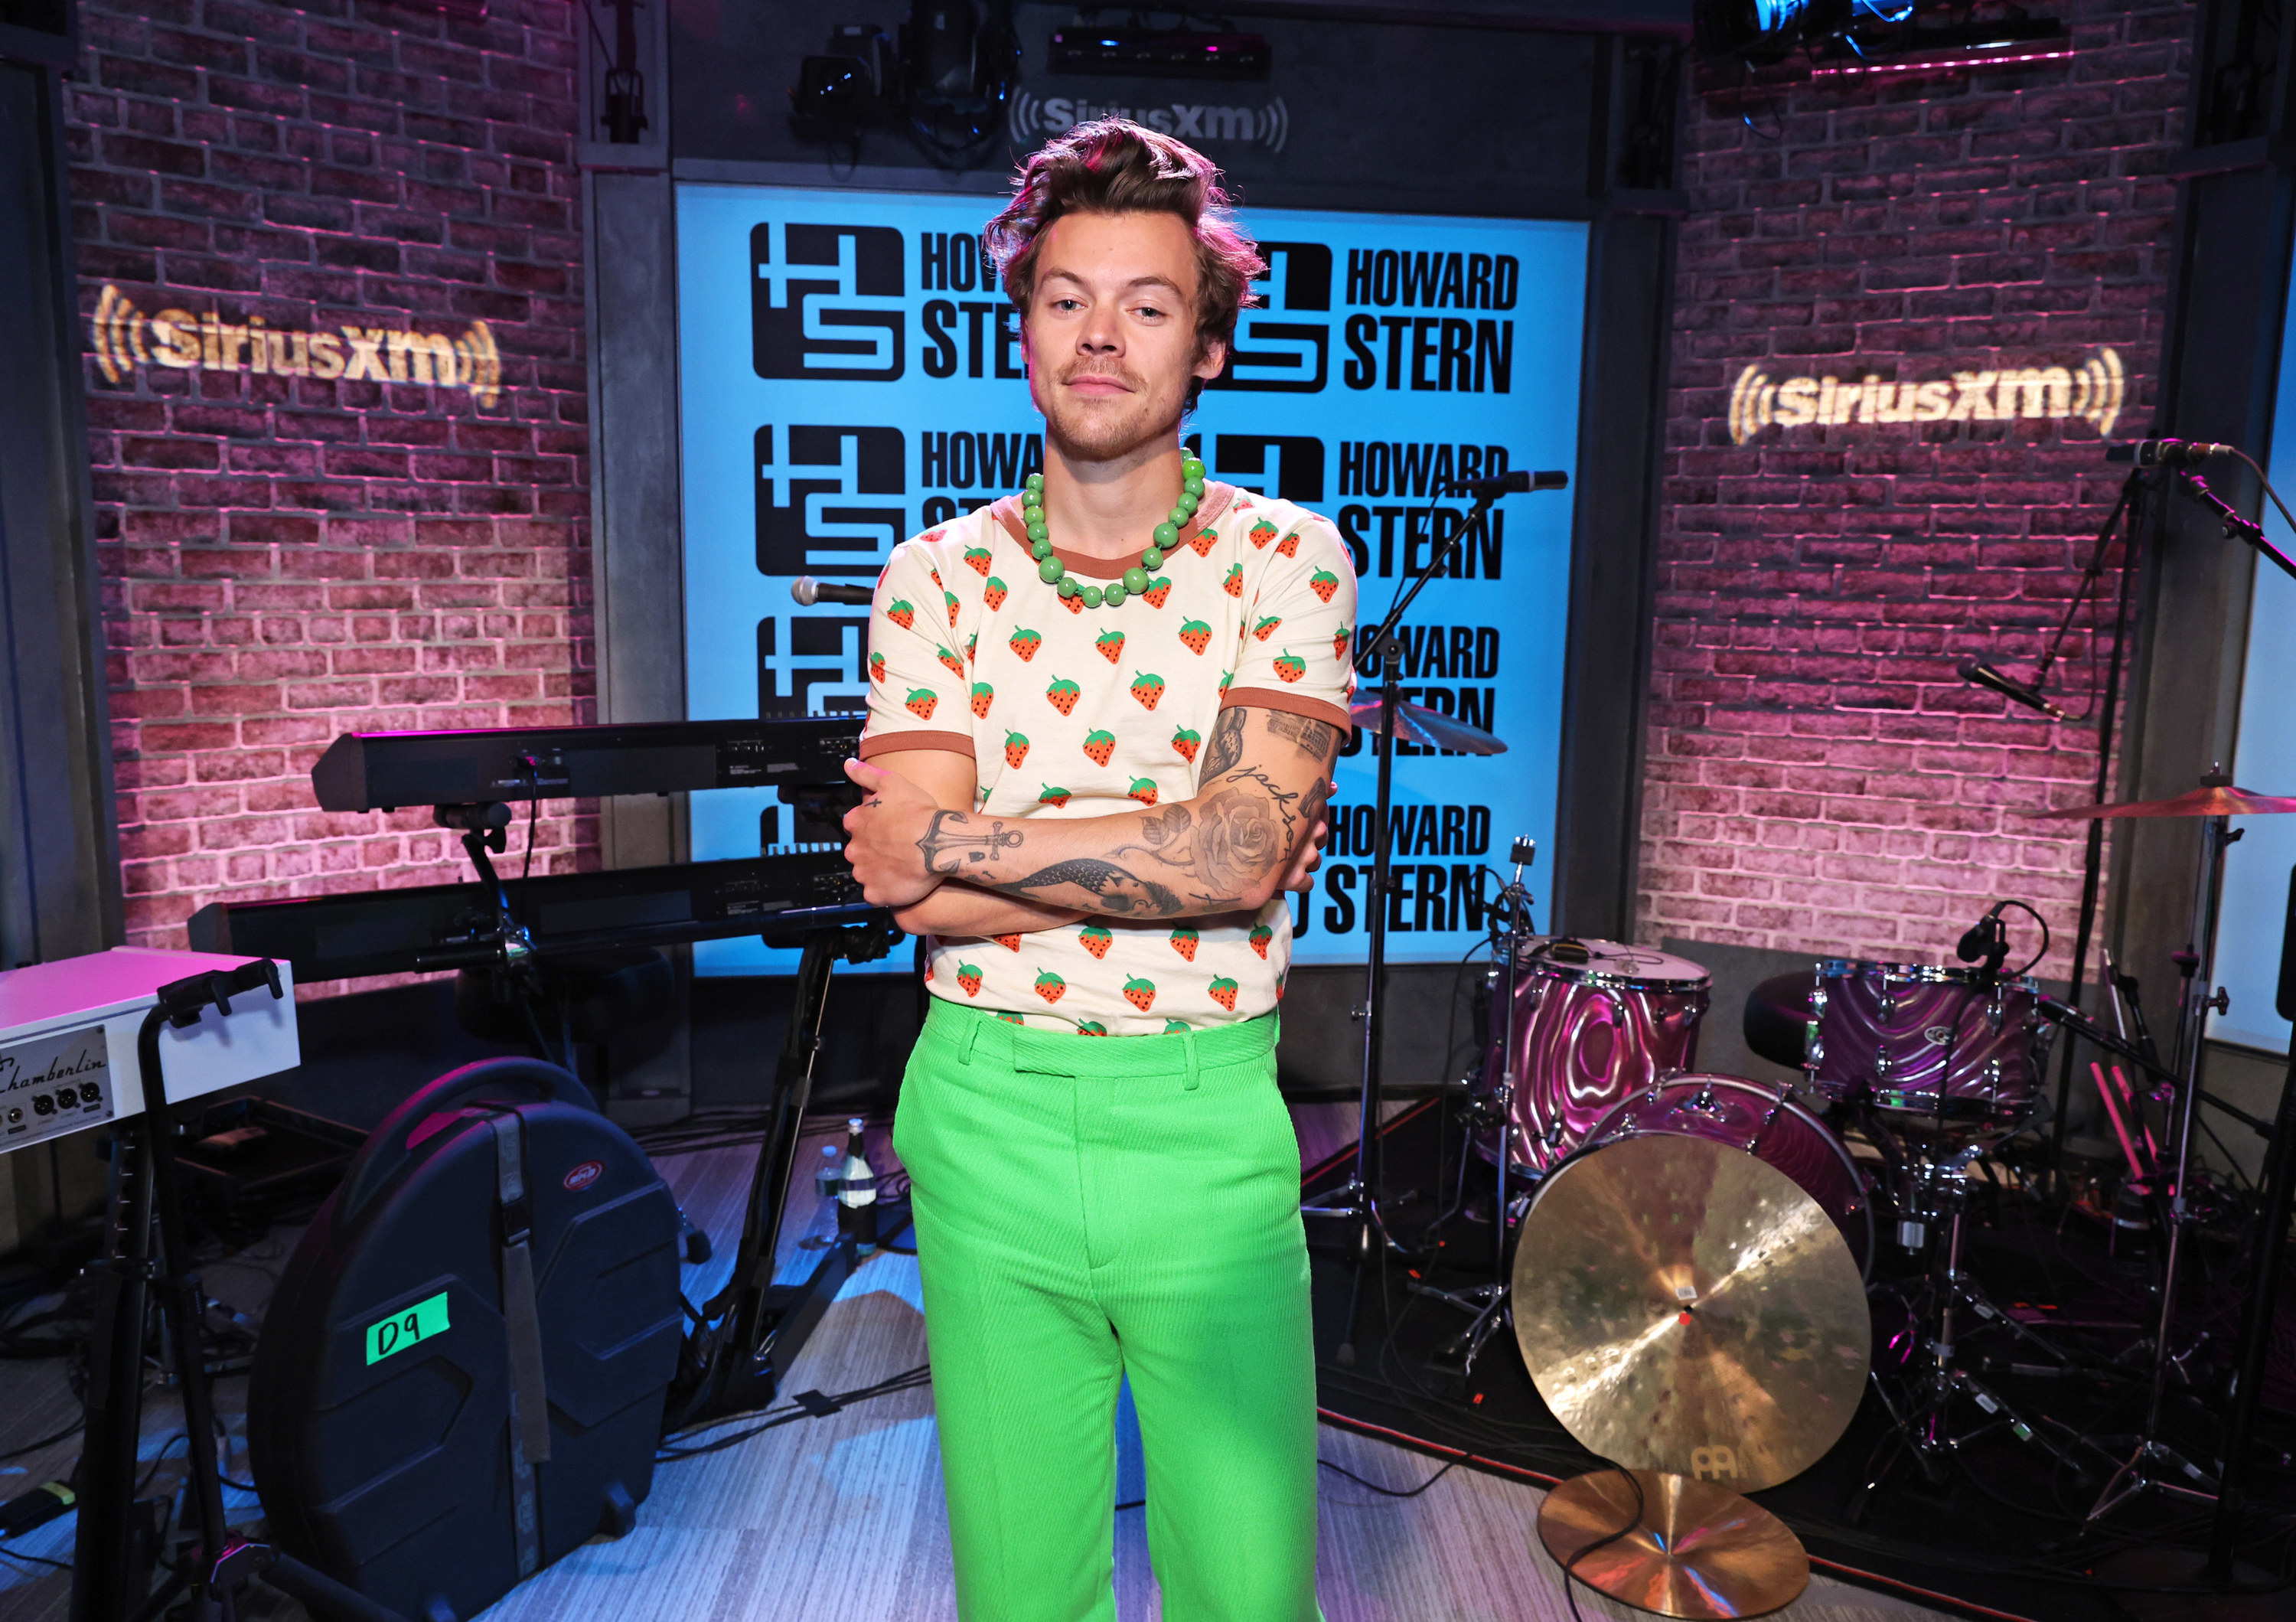 Harry poses for a photo in front of band equipment